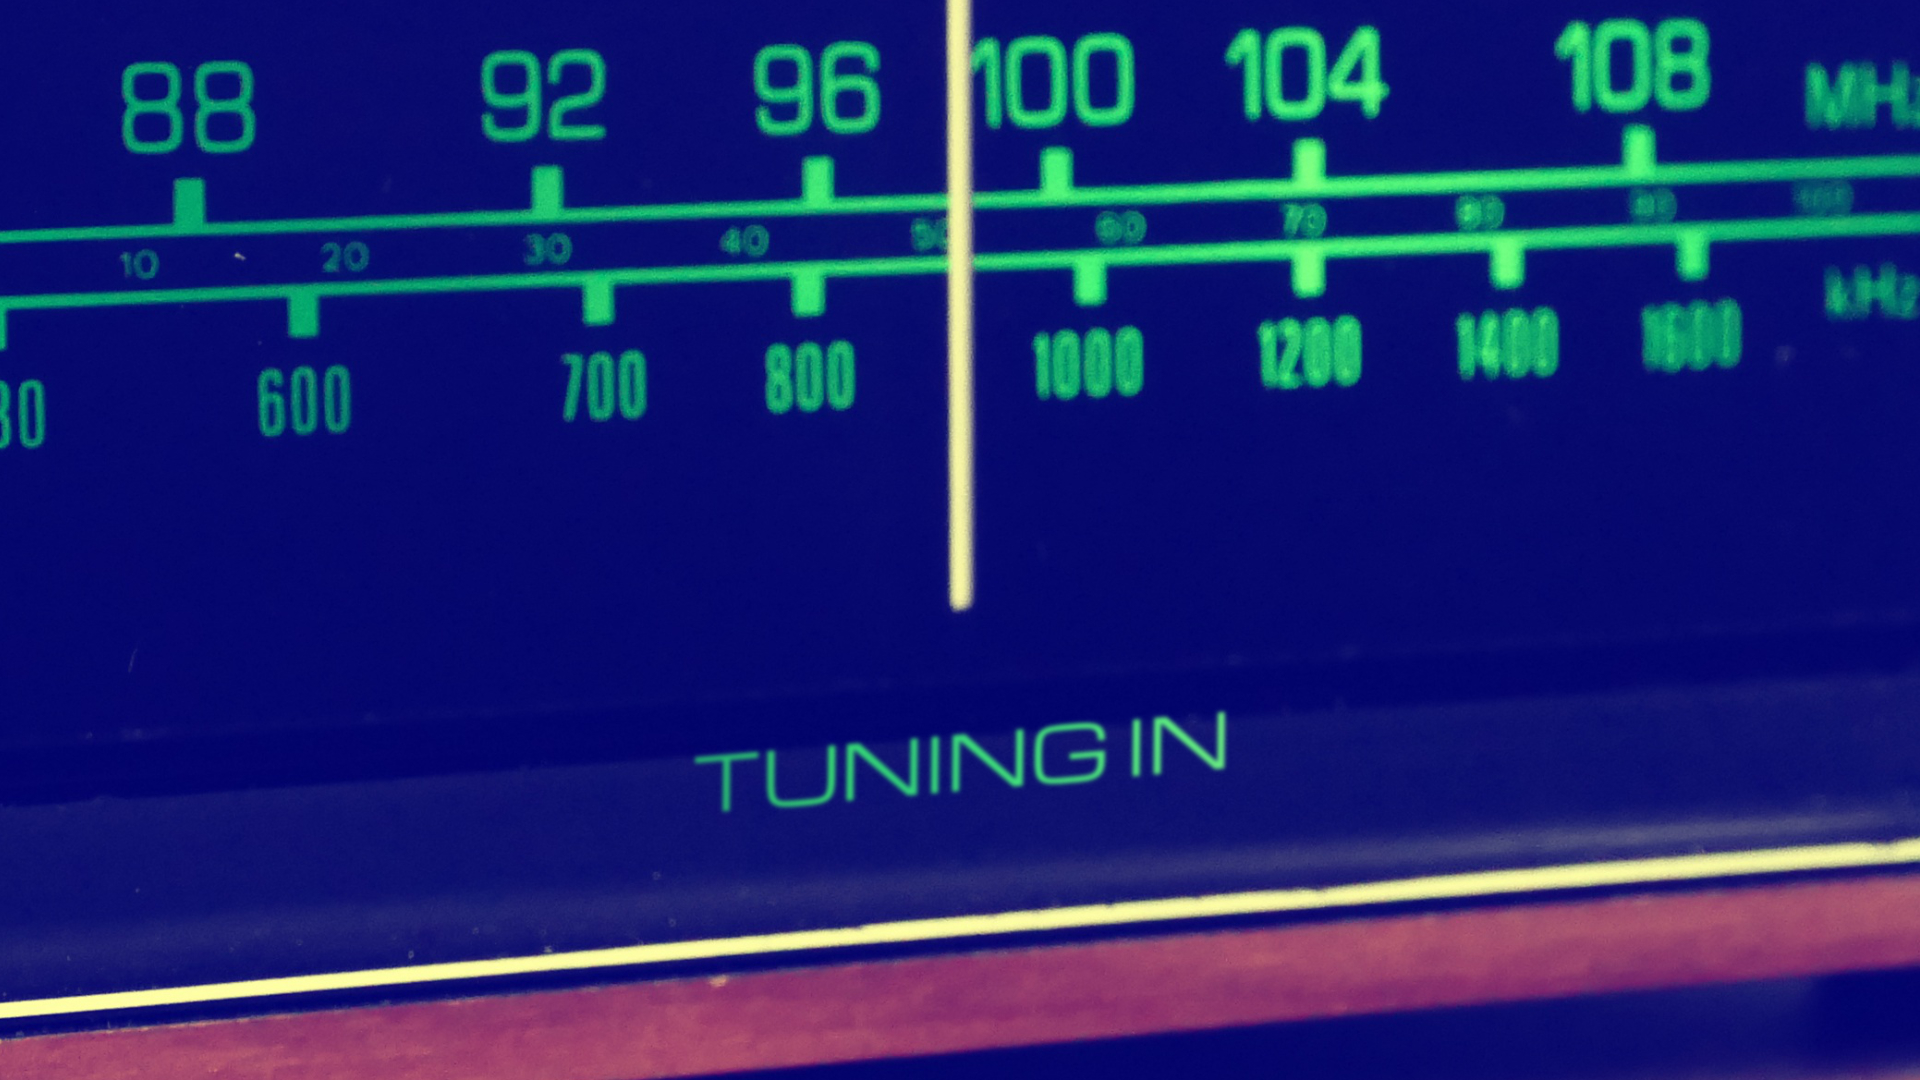 Radio tuner with 'Tuning In' title